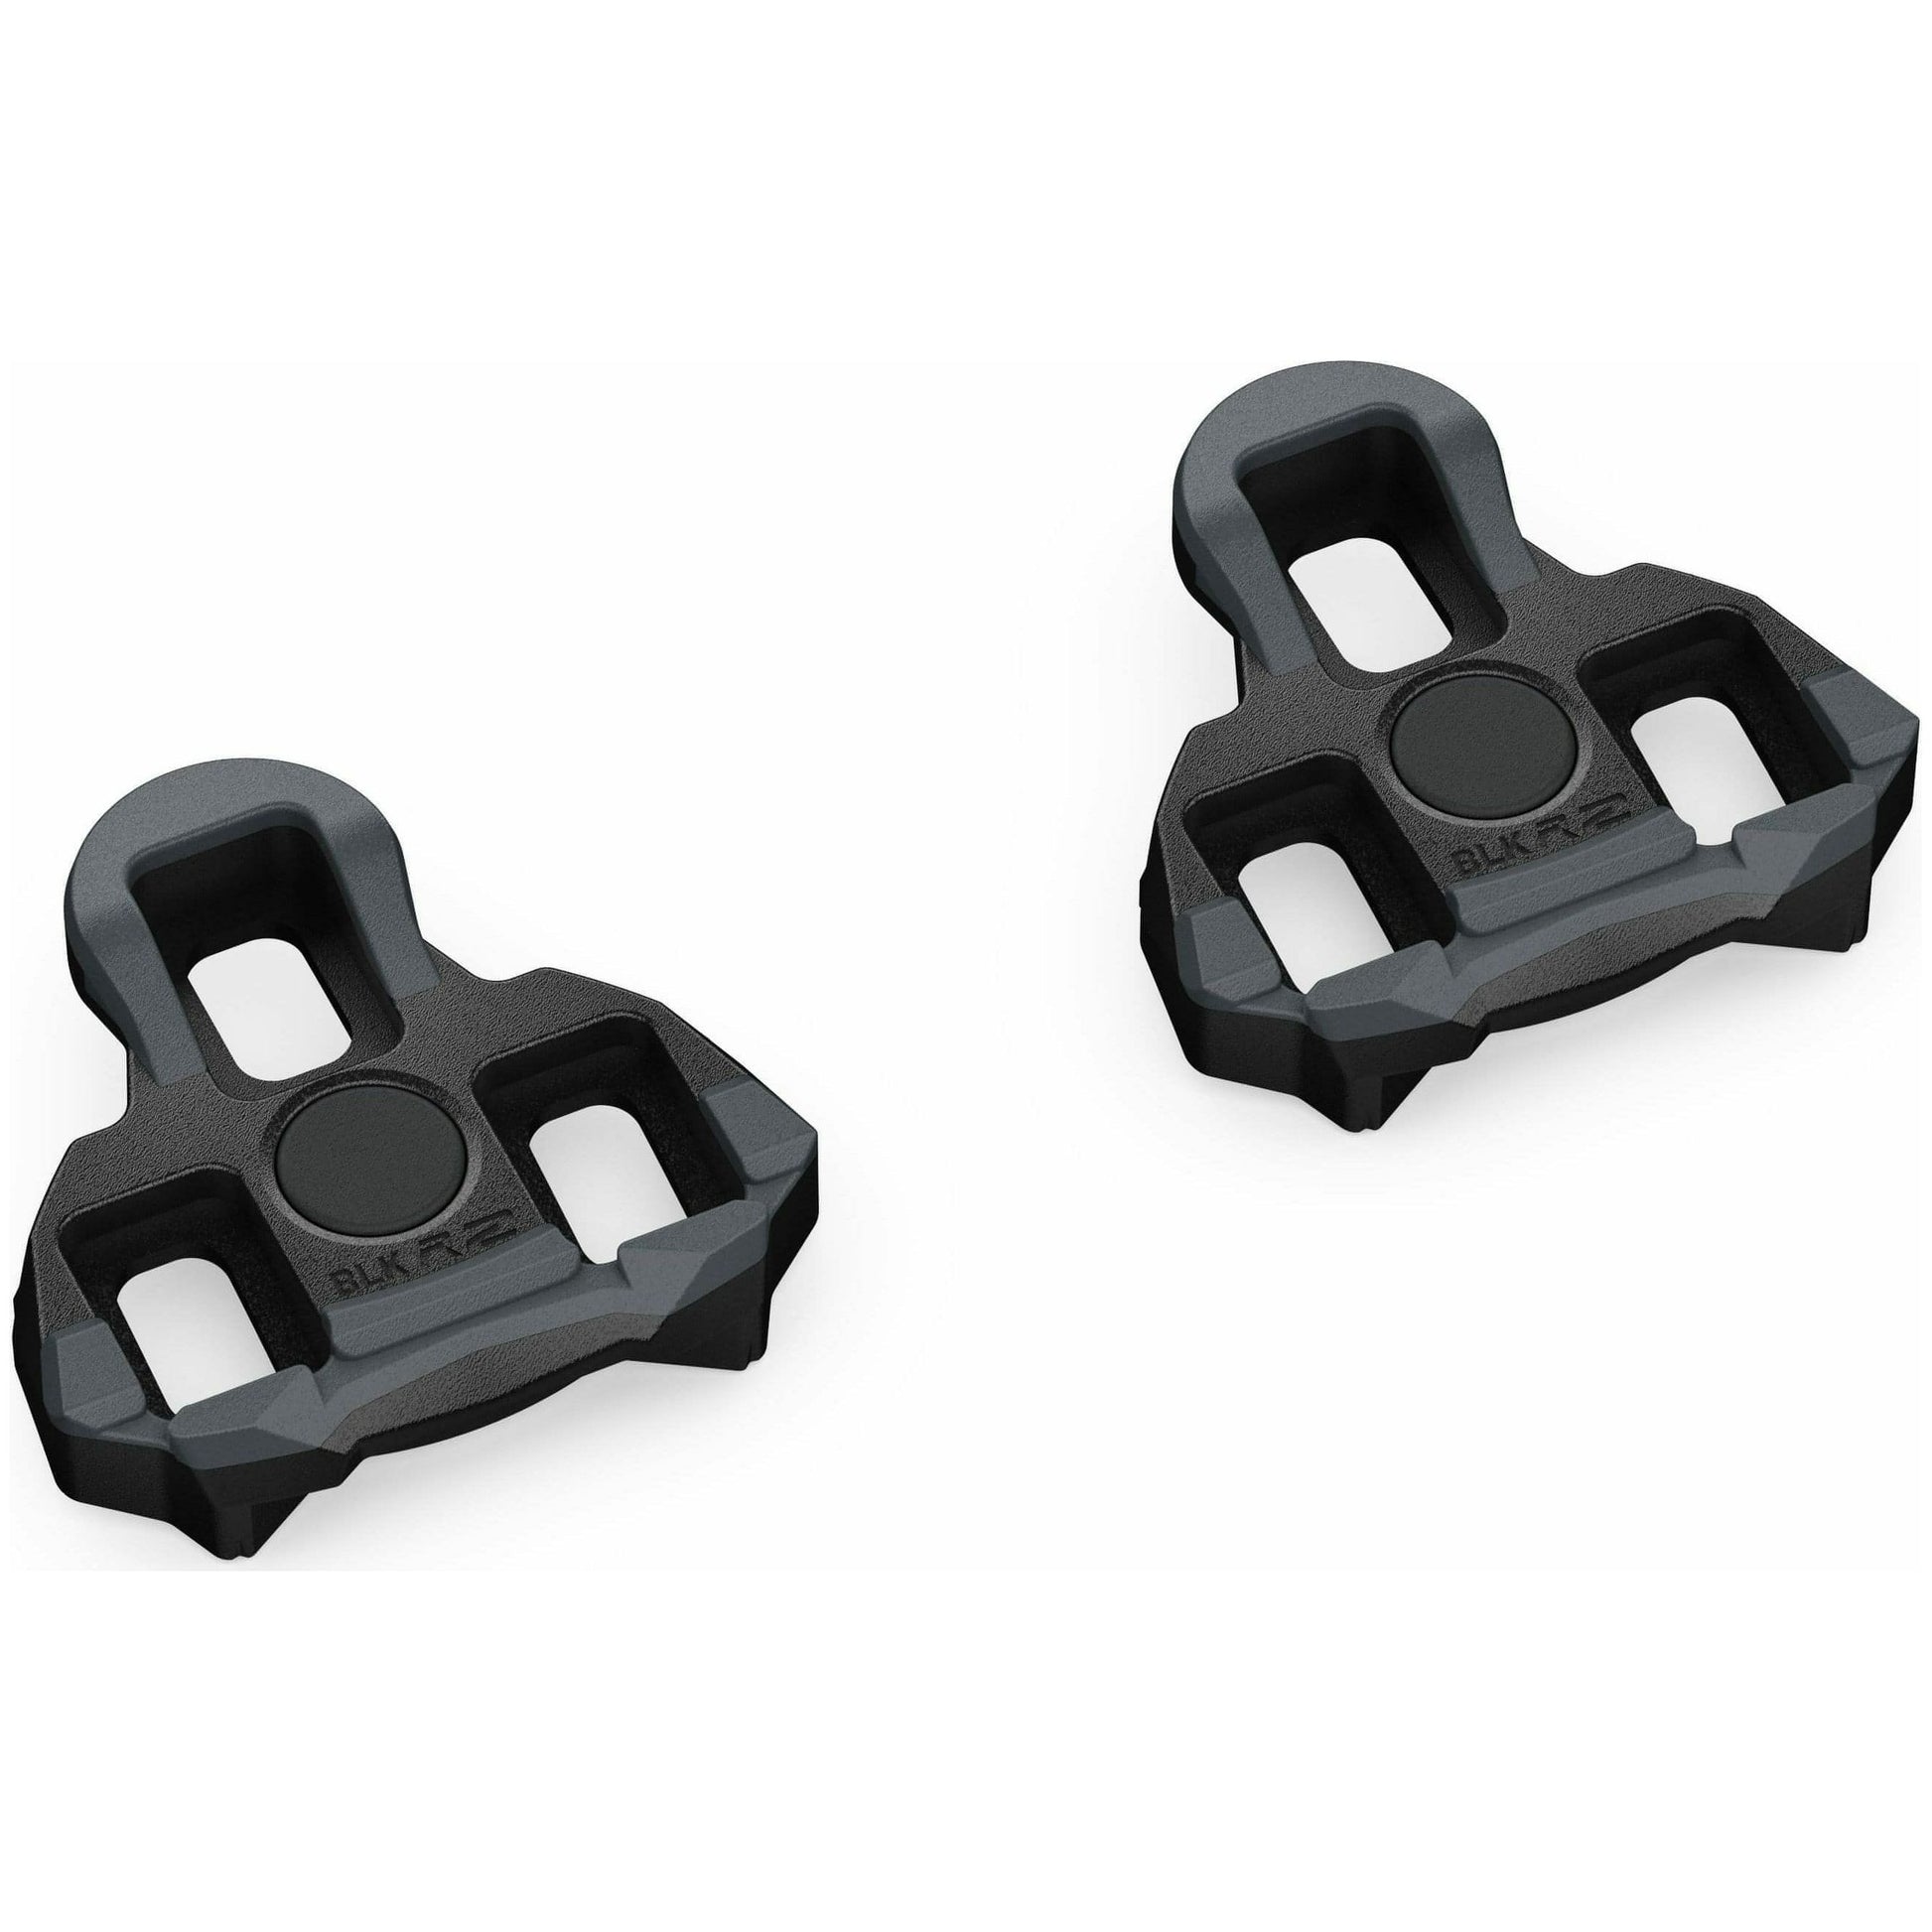 Garmin Rally RK Replacement Cleats 0° Float 753759277000 - Start Fitness